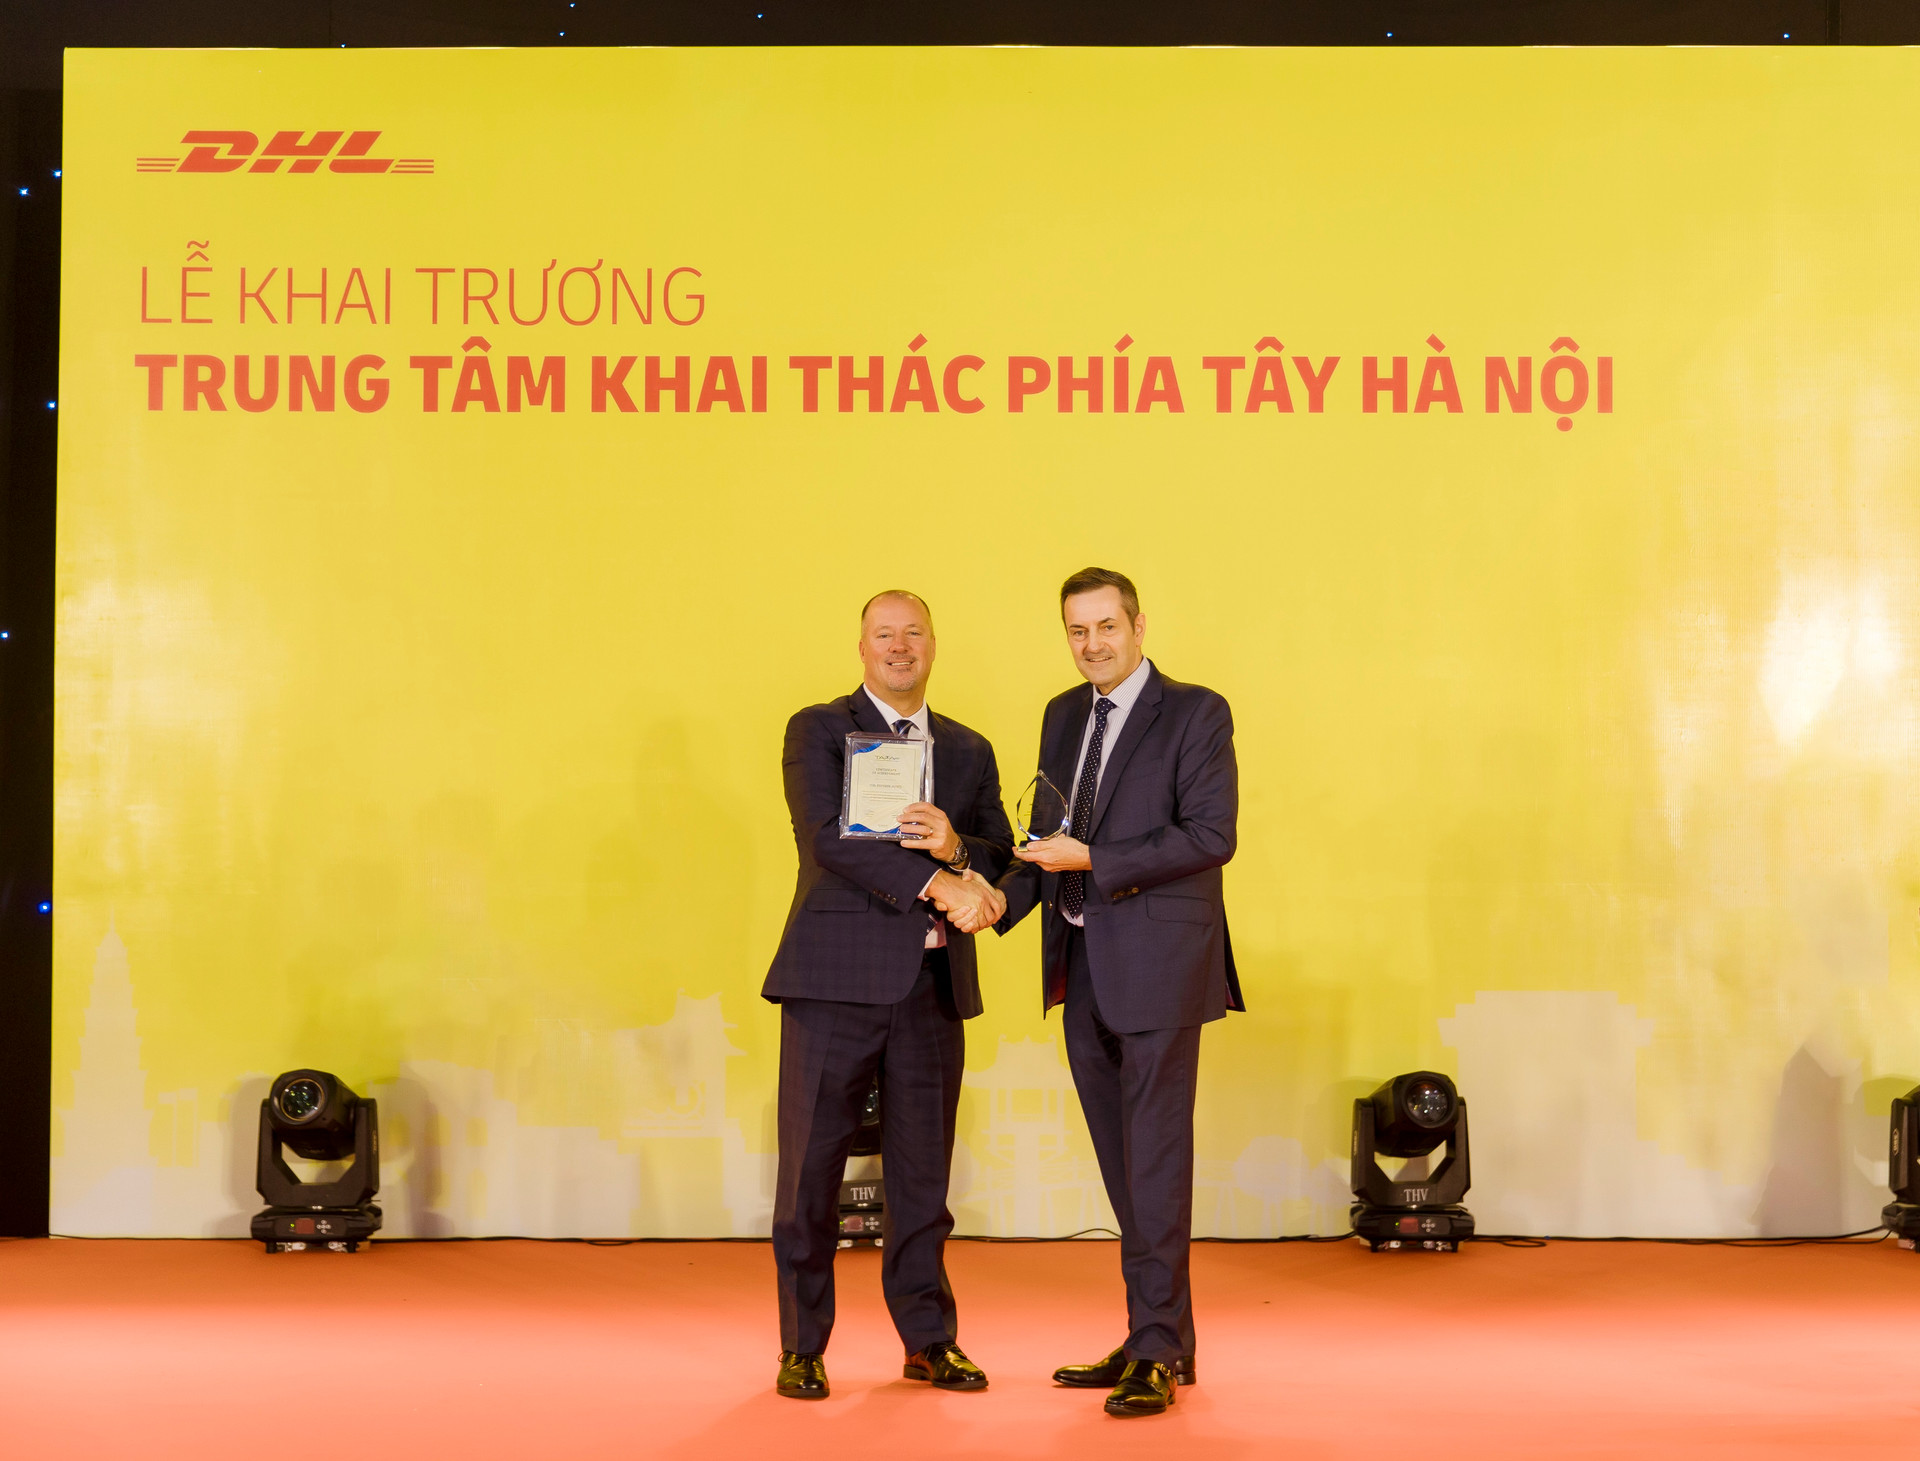 travis-cobb-evp-global-network-operations-aviation-dhl-express-on-the-left-received-100th-tapa-a-certificate-in-apec-from-tapa-apac-chairman.jpg